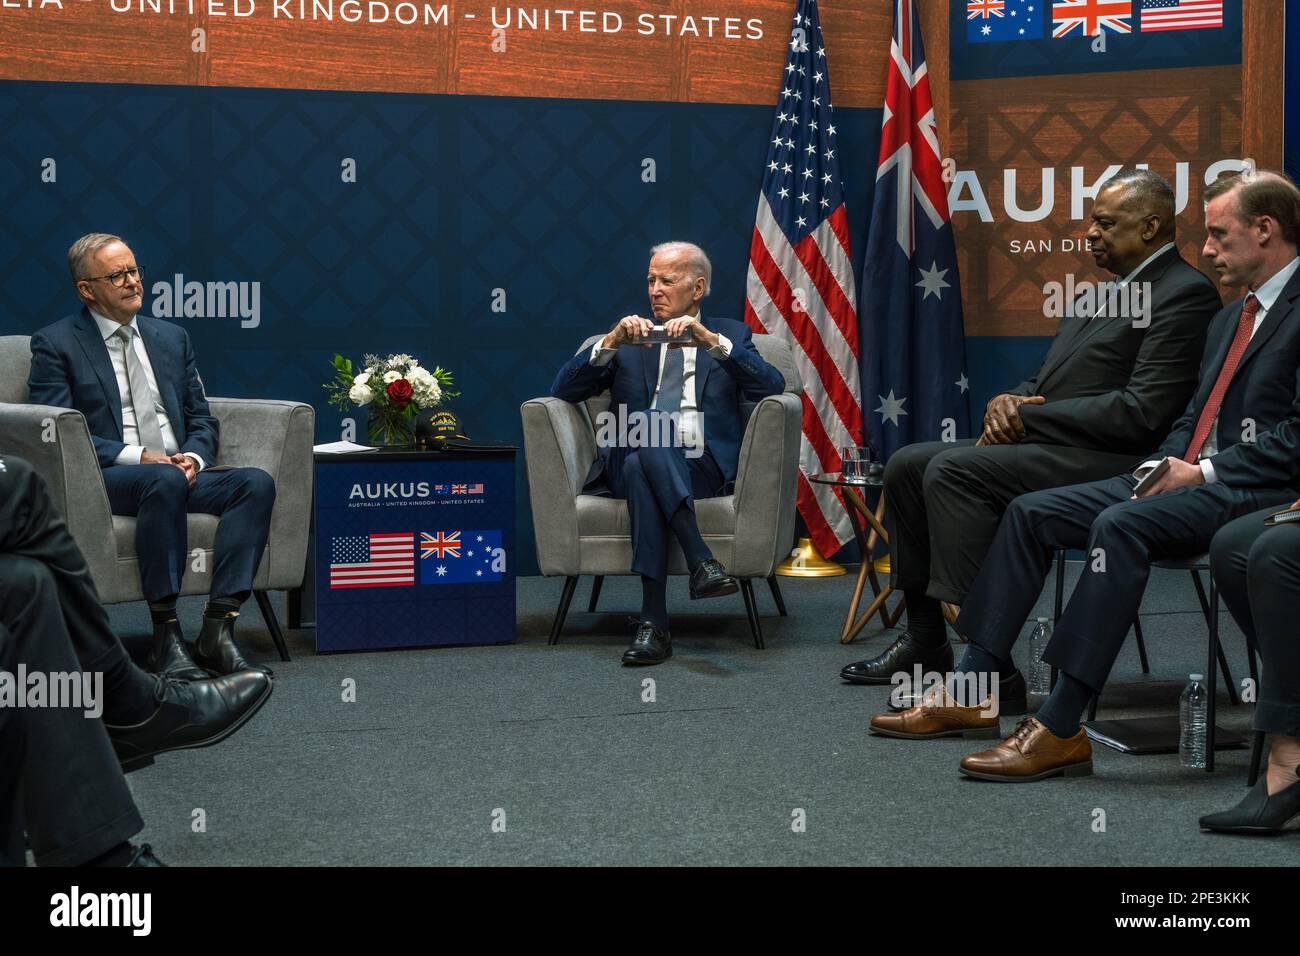 San Diego, United States of America. 13 March, 2023. U.S President Joe Biden, center, listens to Australian Prime Minister Anthony Albanese, left, during a bilateral meeting at Point Loma naval base, March 13, 2023 in San Diego, California. Joining the meeting are U.S Secretary of Defense Lloyd Austin, 2nd right, and National Security Advisor Jake Sullivan, right.  Credit: Adam Schultz/White House Photo/Alamy Live News Stock Photo